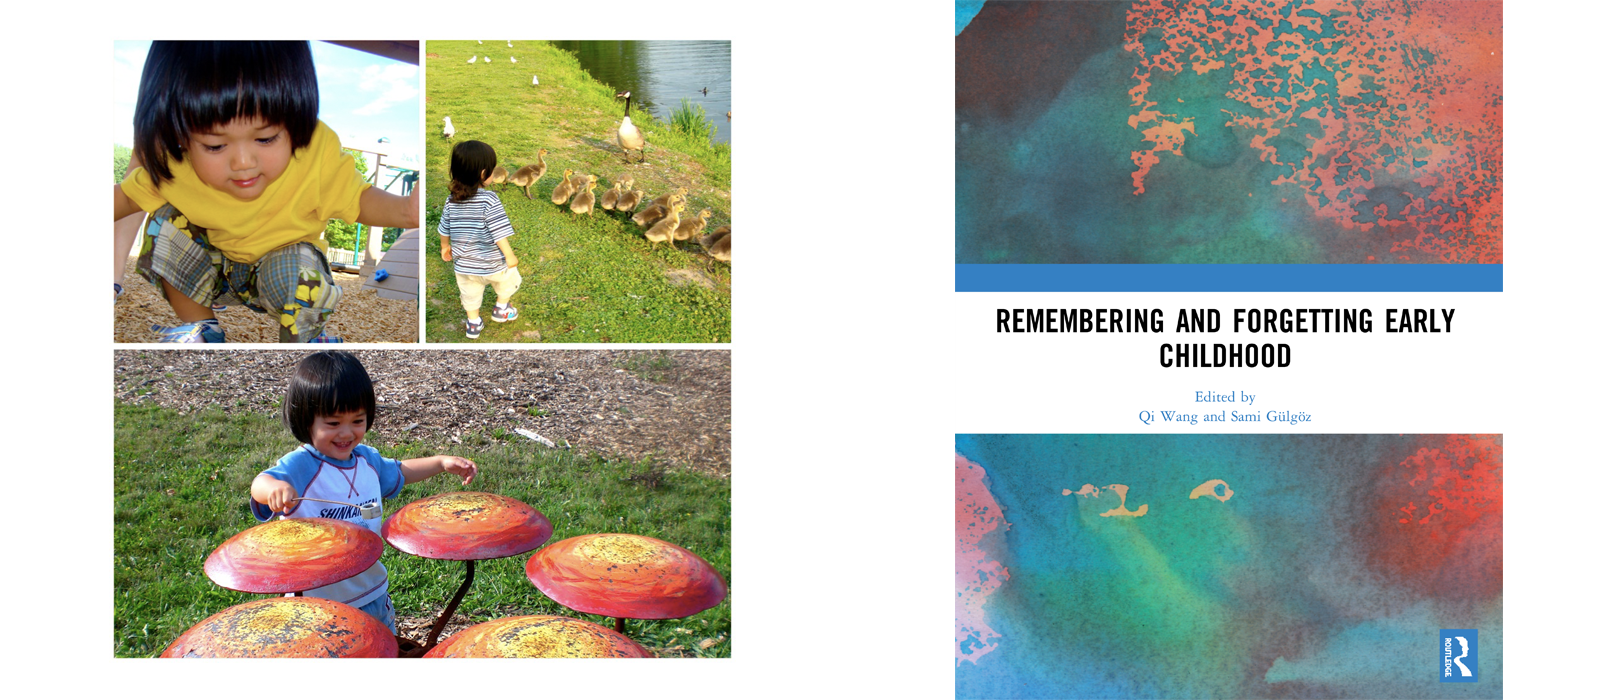 montage of pictures of a child playing and the cover of the book "Remembering and Forgetting Early Childhood"